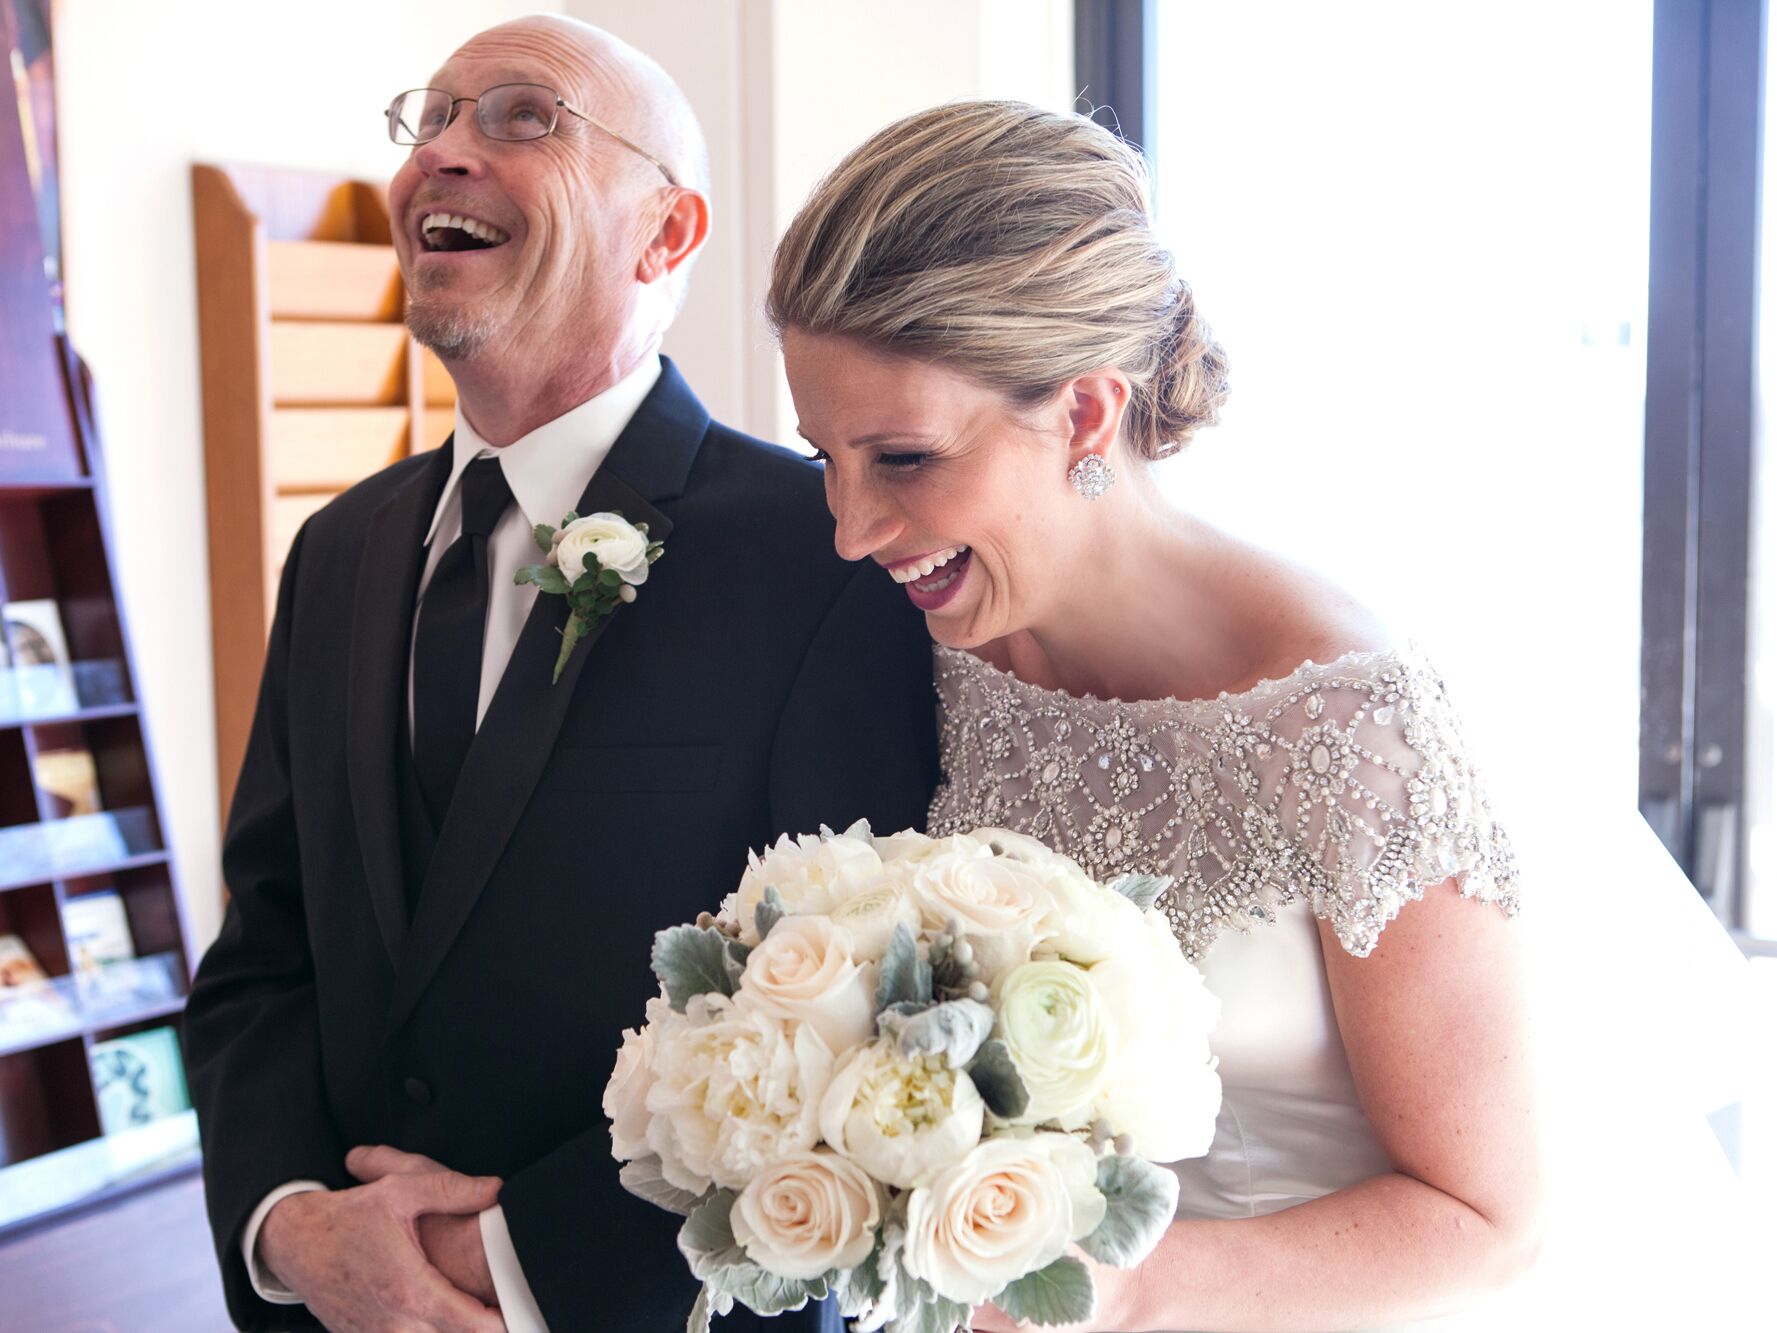 A bride and her father laughing just before the wedding ceremony